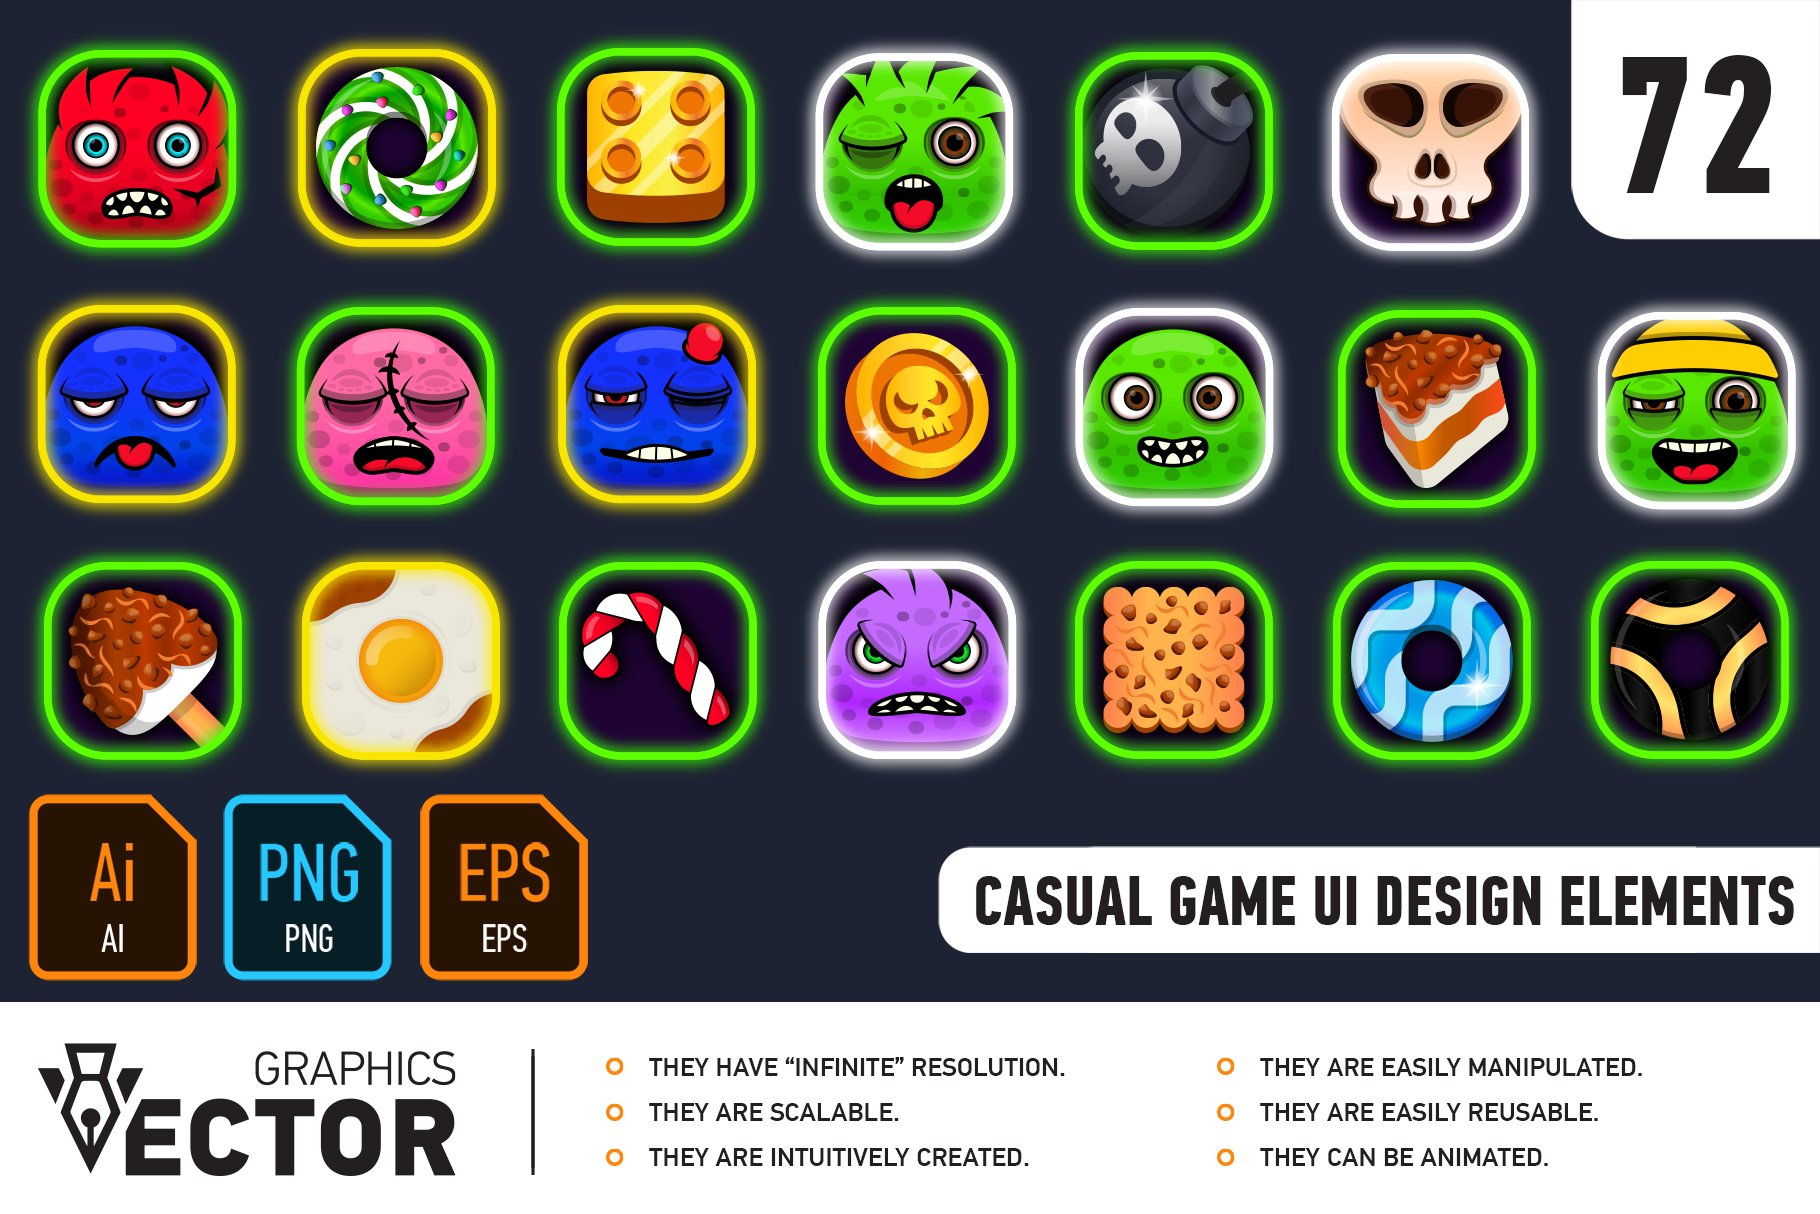 Casual Game UI Design elements cover image.